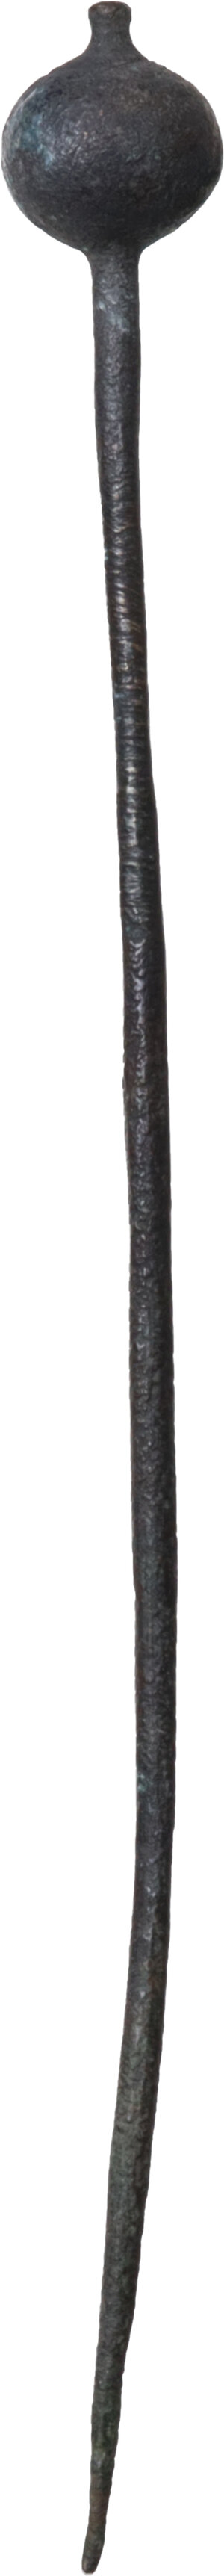 obverse: BRONZE NEEDLE Roman period, c. 1st - 4th century AD. Bronze needle with large head. Lenght: 124 mm